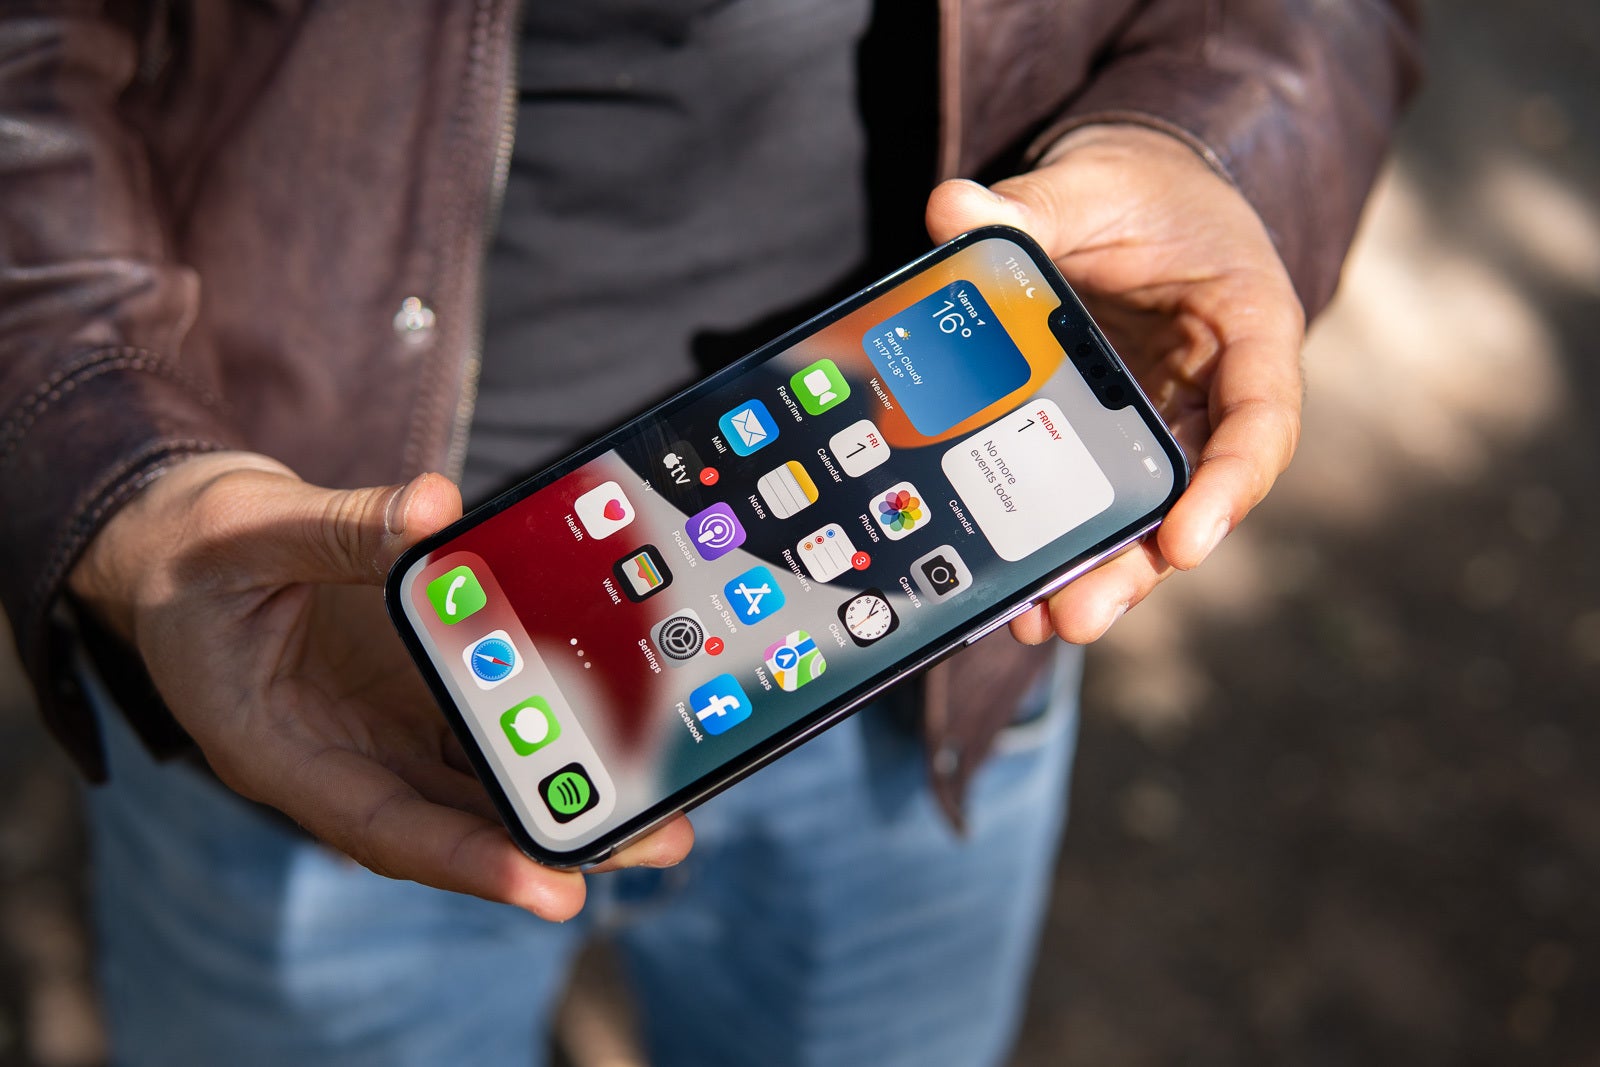 Don't lend your iPhone to a stranger.  If they need to make a call, call it for them - If you don't want to end up like that guy whose phone was stolen, here's how to protect your iPhone